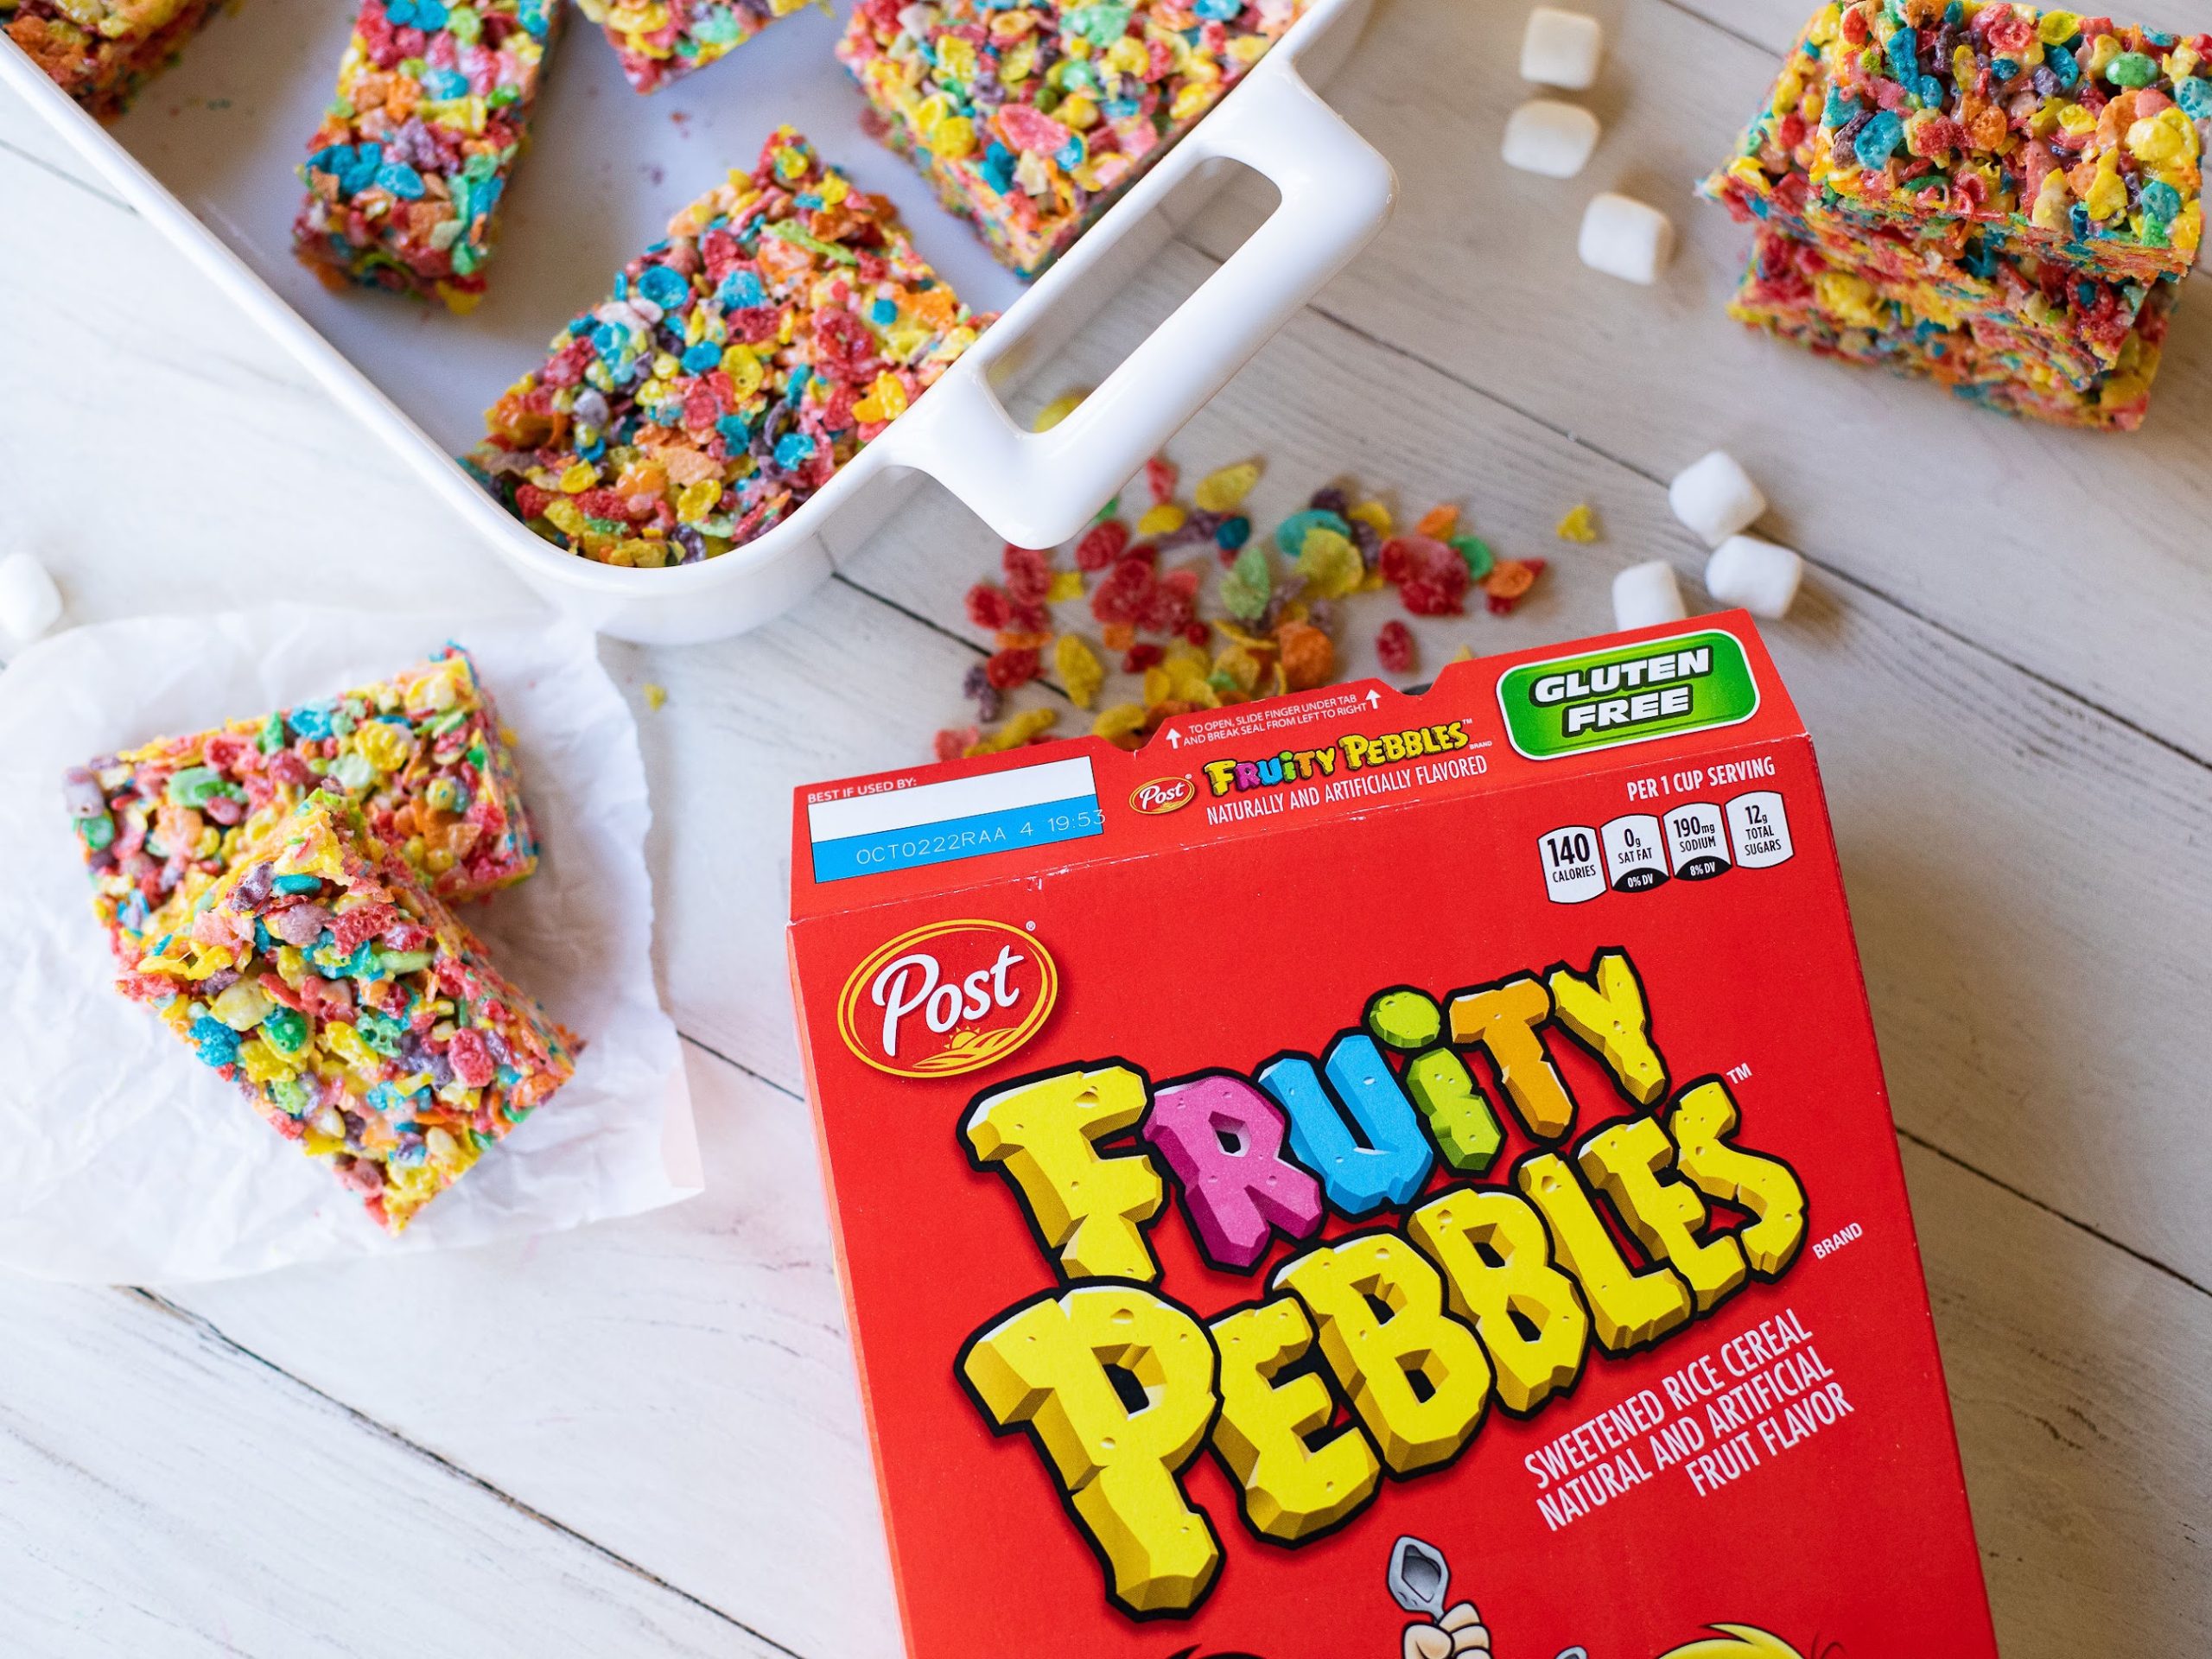 Get The Large Size Boxes of Post Pebbles Cereal For As Low As $2.10 At Publix